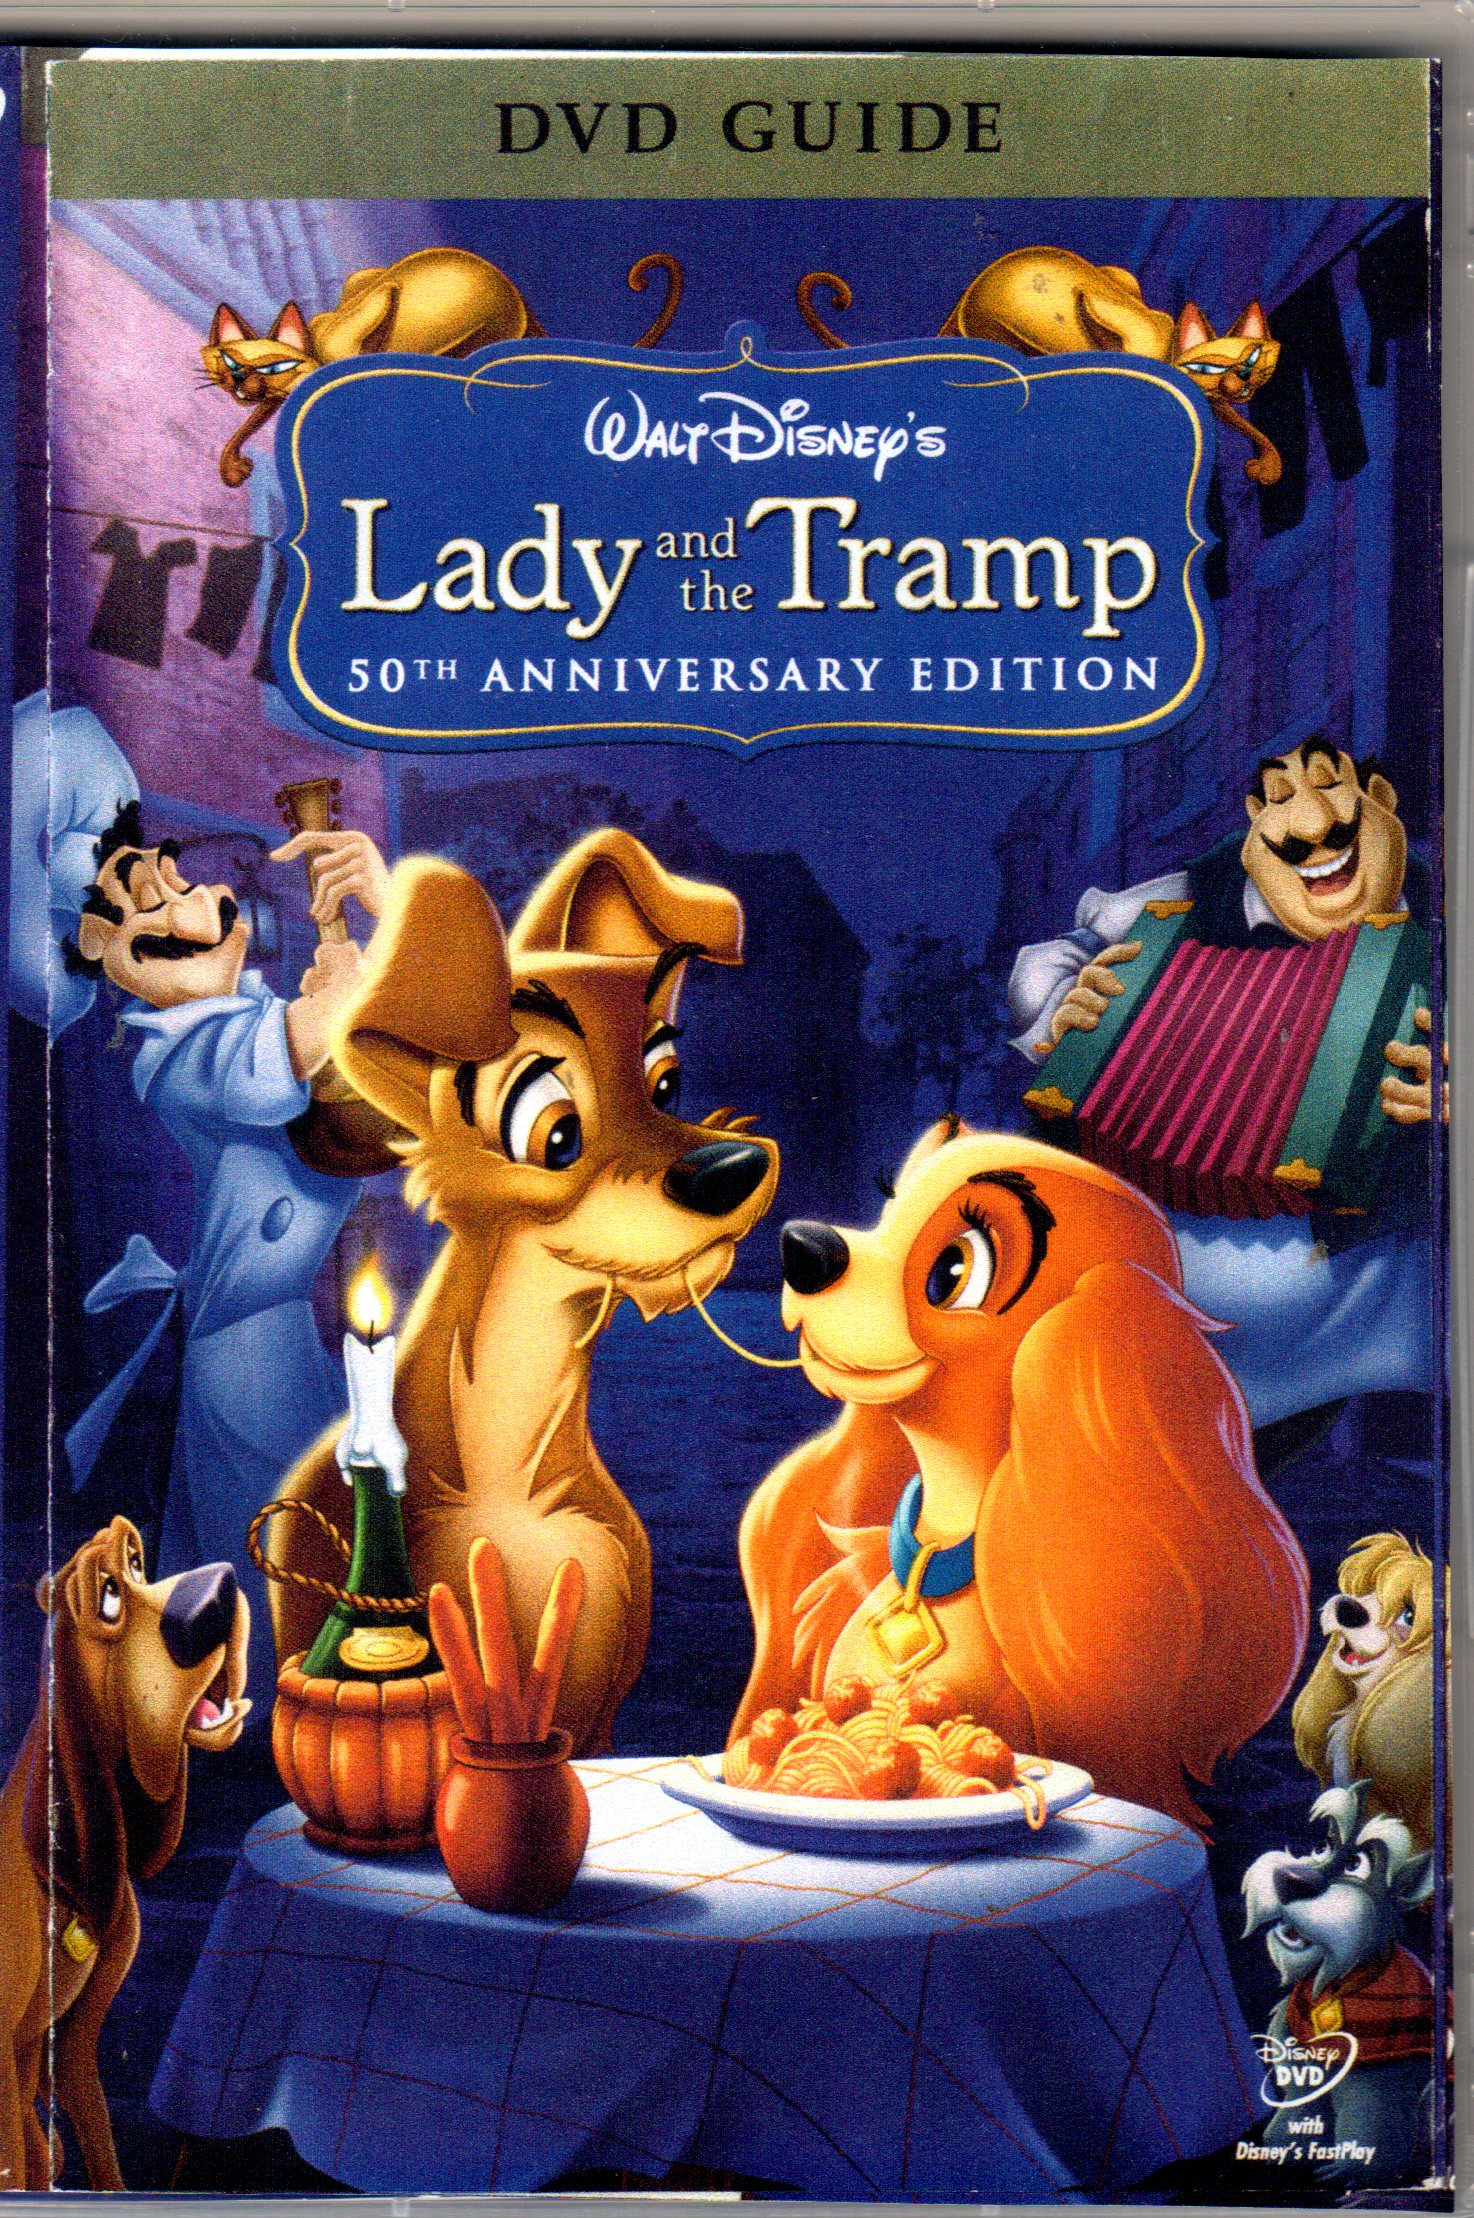 LADY AND THE TRAMP” 50th Anniversary Edition (2 DVD's): A Walt Disney  Animated Film. PRIVATE COLLECTION. * 2 ITEMS MINIMUM FOR INTERNATIONAL  ORDERS FROM USA. ONLY $ FEE PER ADDITIONAL ITEM SHIPPED. – Norberto  Perdomo